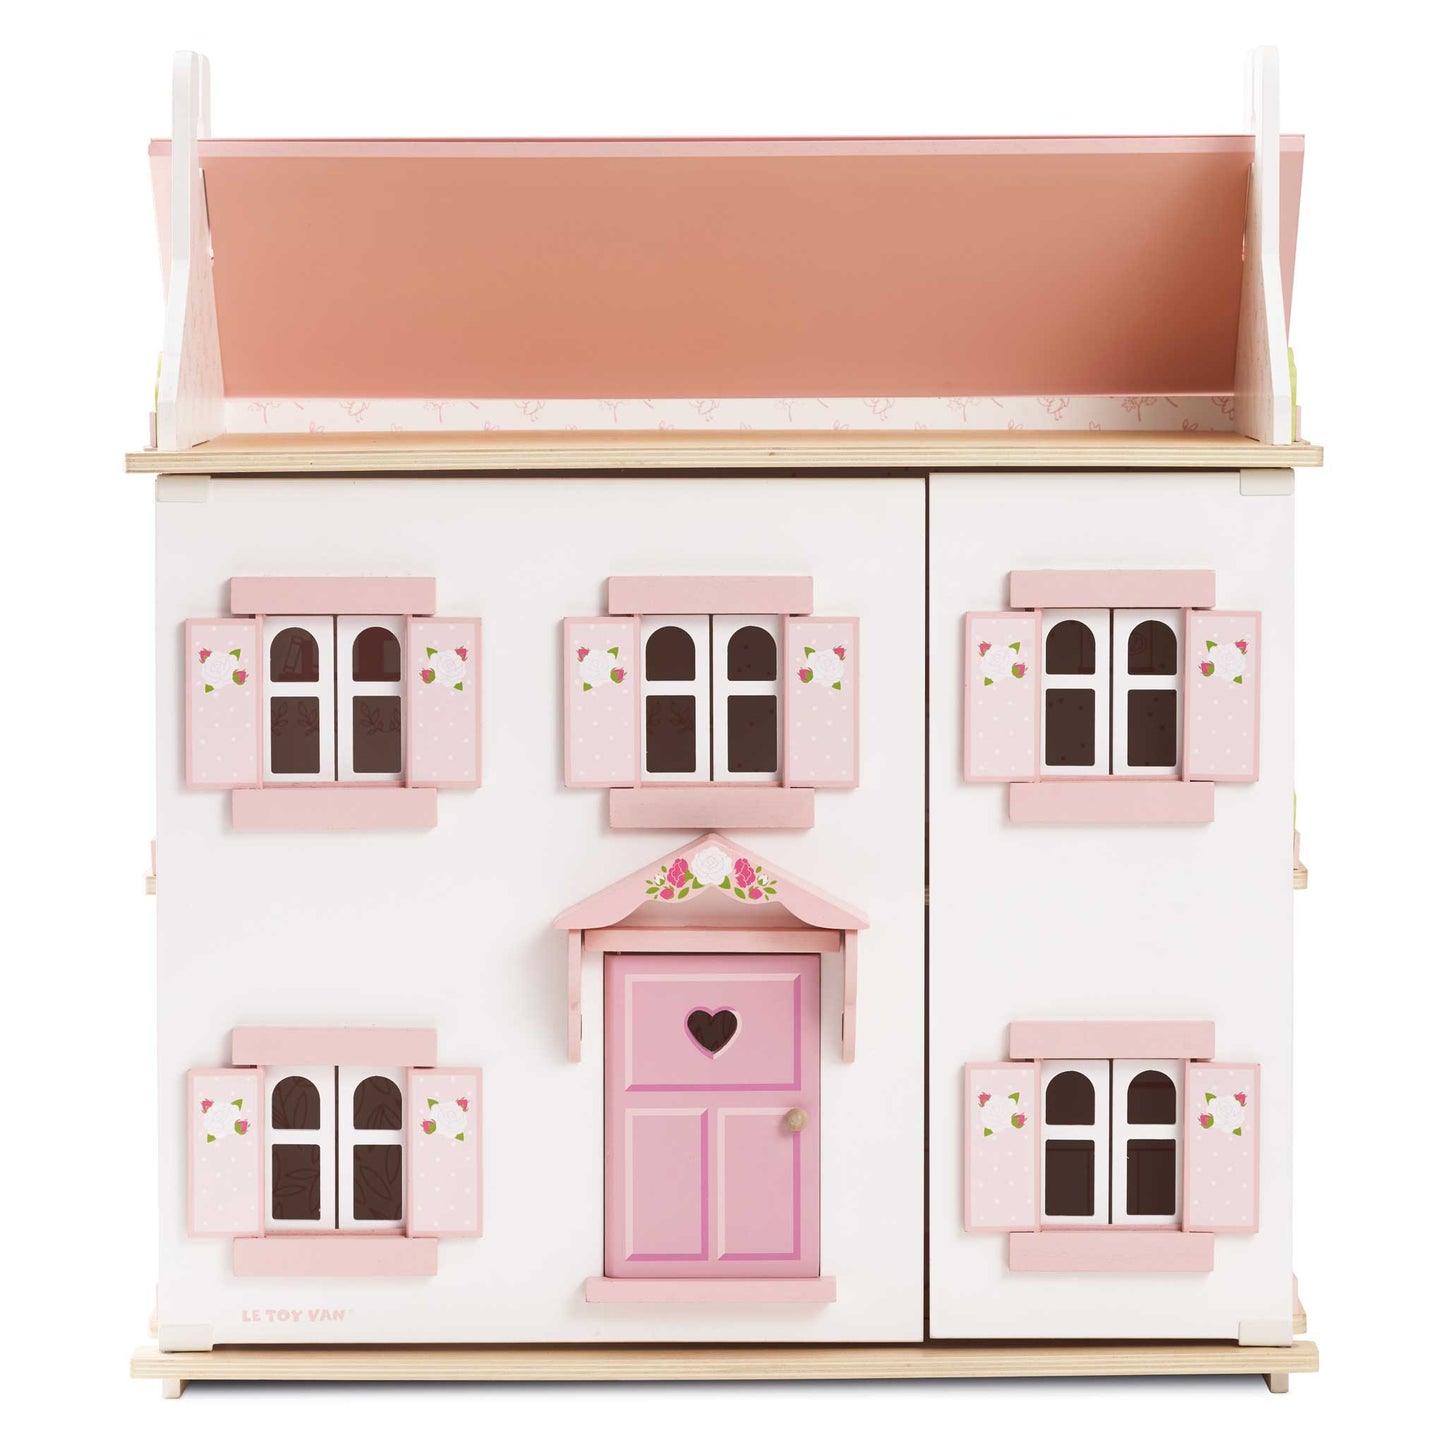 Sophie's Wooden Dolls House